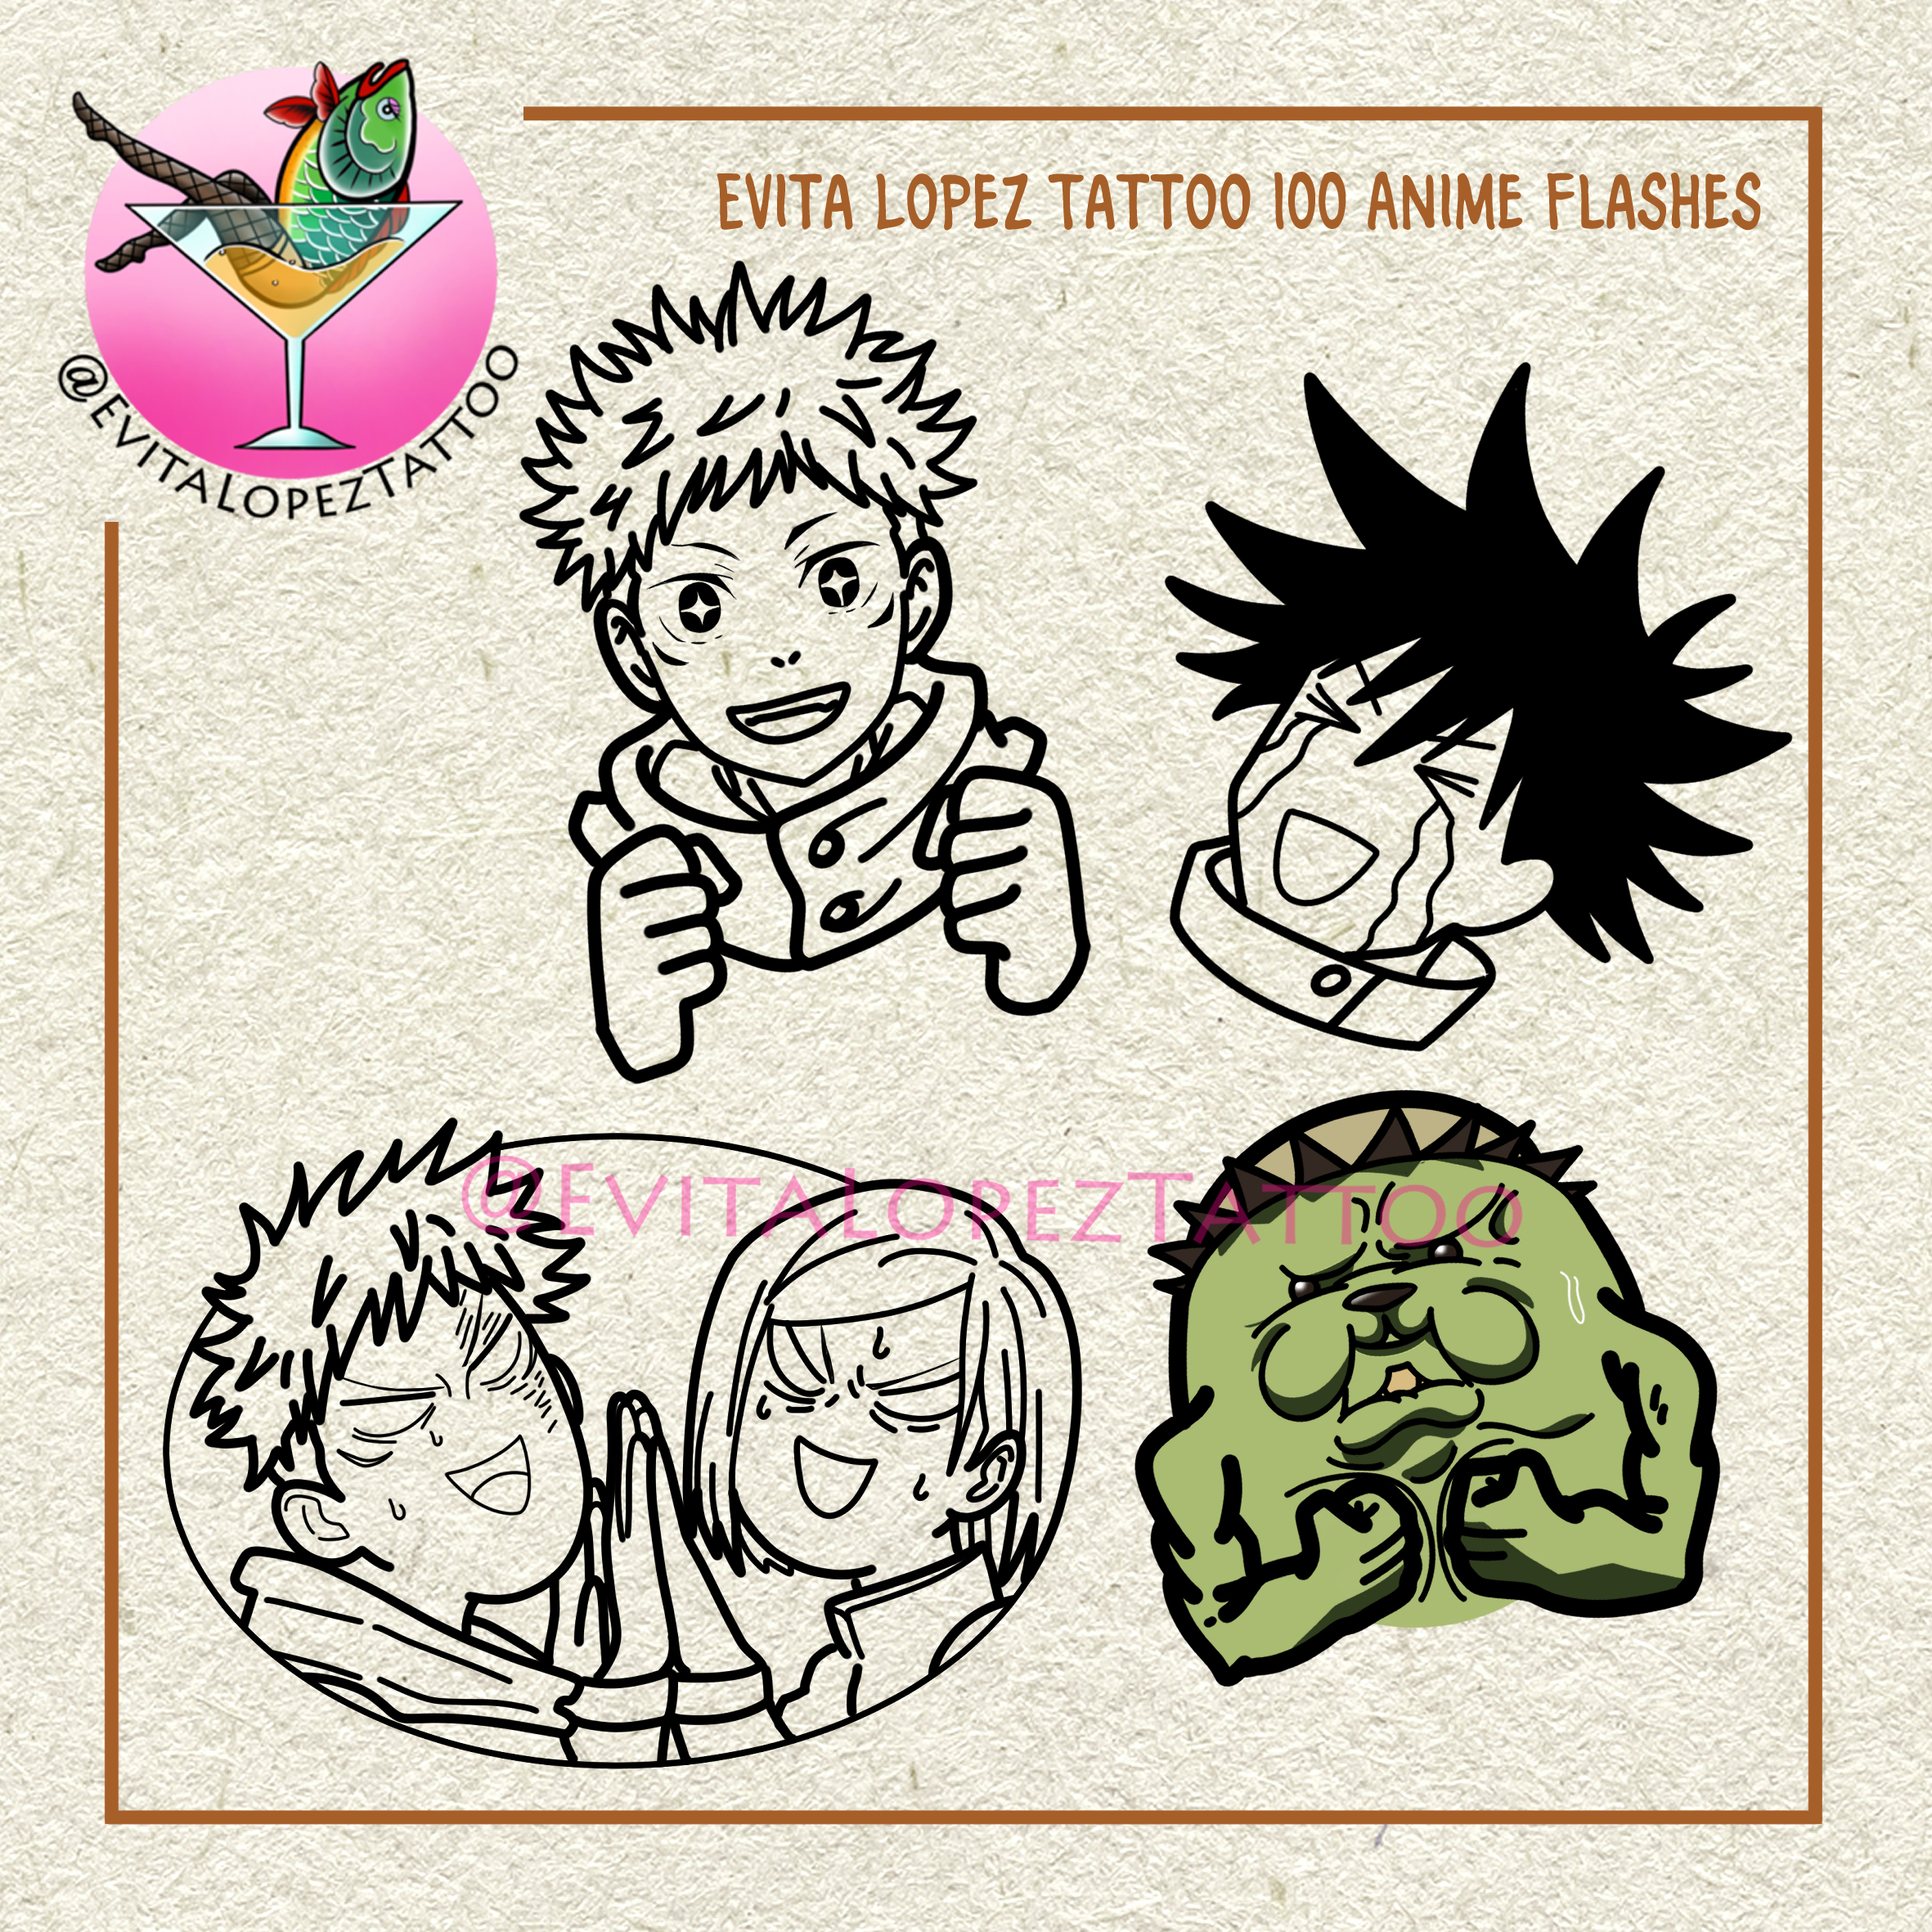 Heres the rest of the anime flash  Eden Shaw Tattoos  Facebook